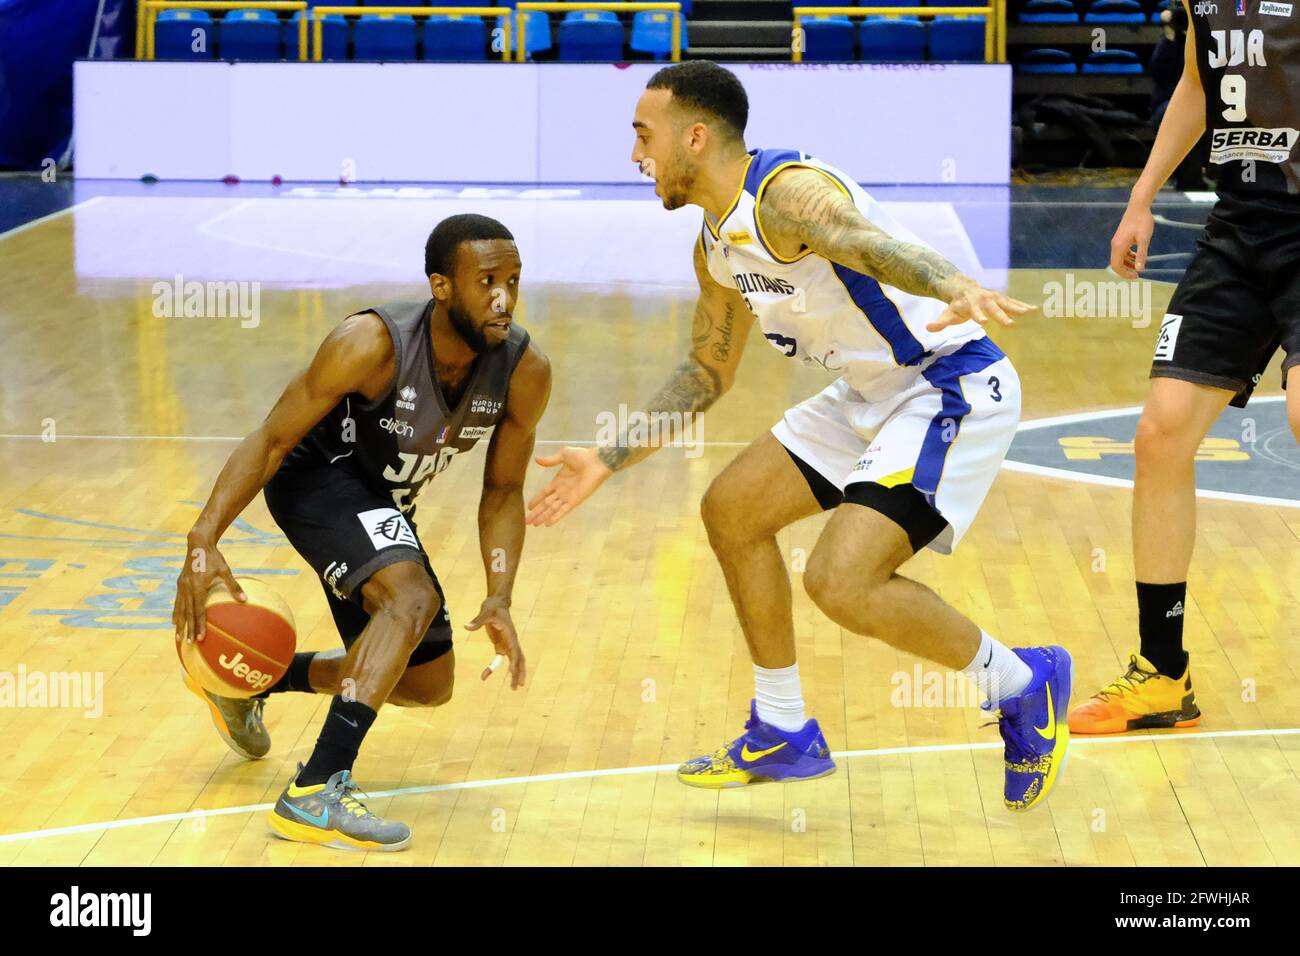 Levallois, Hauts de Seine, France. 22nd May, 2021. DAVID HOLSTON (USA)  Point guard of Dijon in action during the French Basketball championship  Jeep Elite between Boulogne-Levallois and Dijon at Marcel Cerdan stadium -